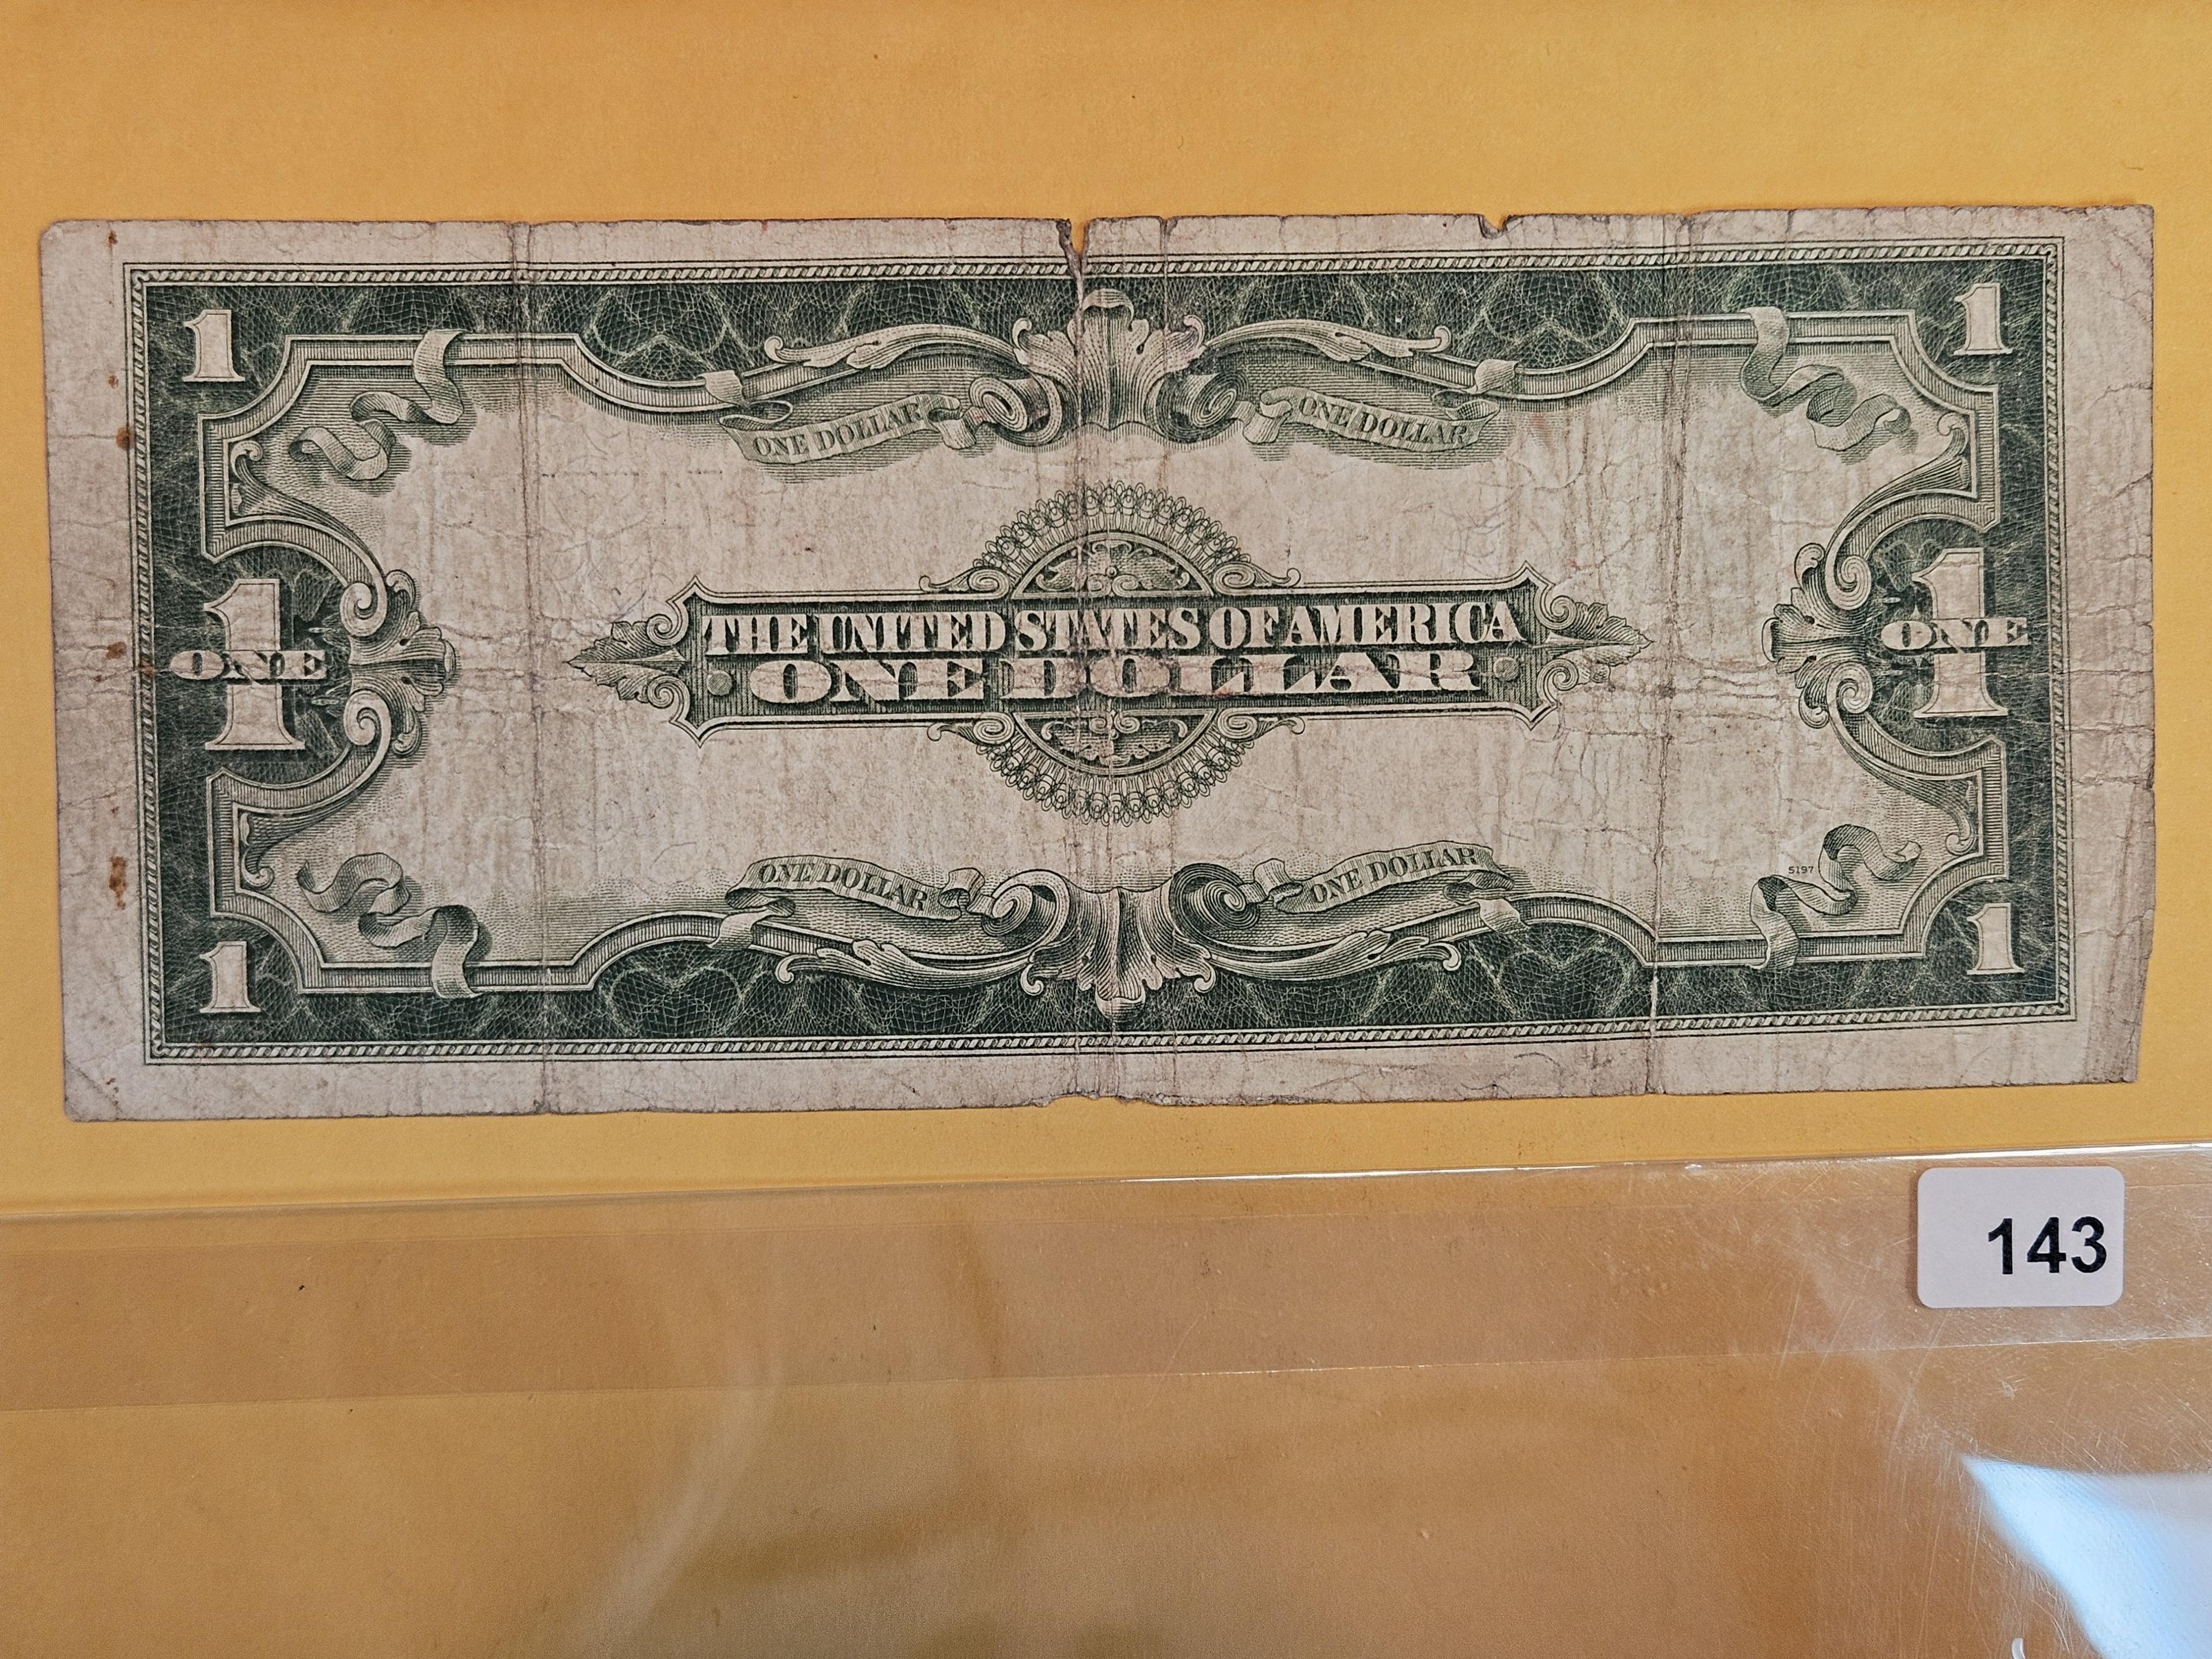 Series 1923 One Dollar Silver Certificate